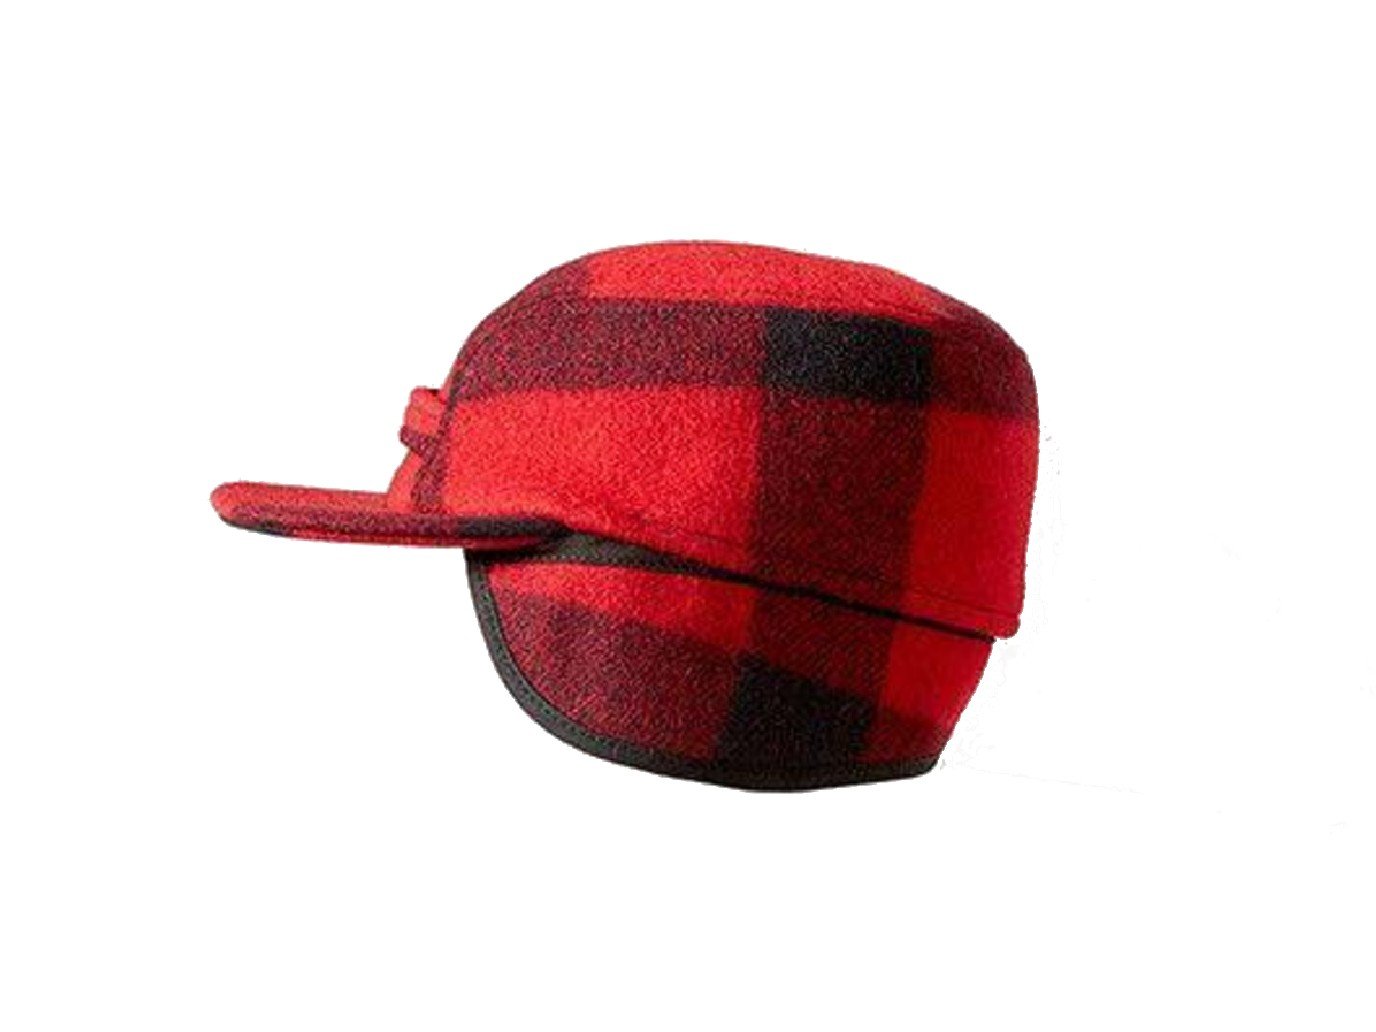 Side view of Filson Mackinaw Cap in red and black